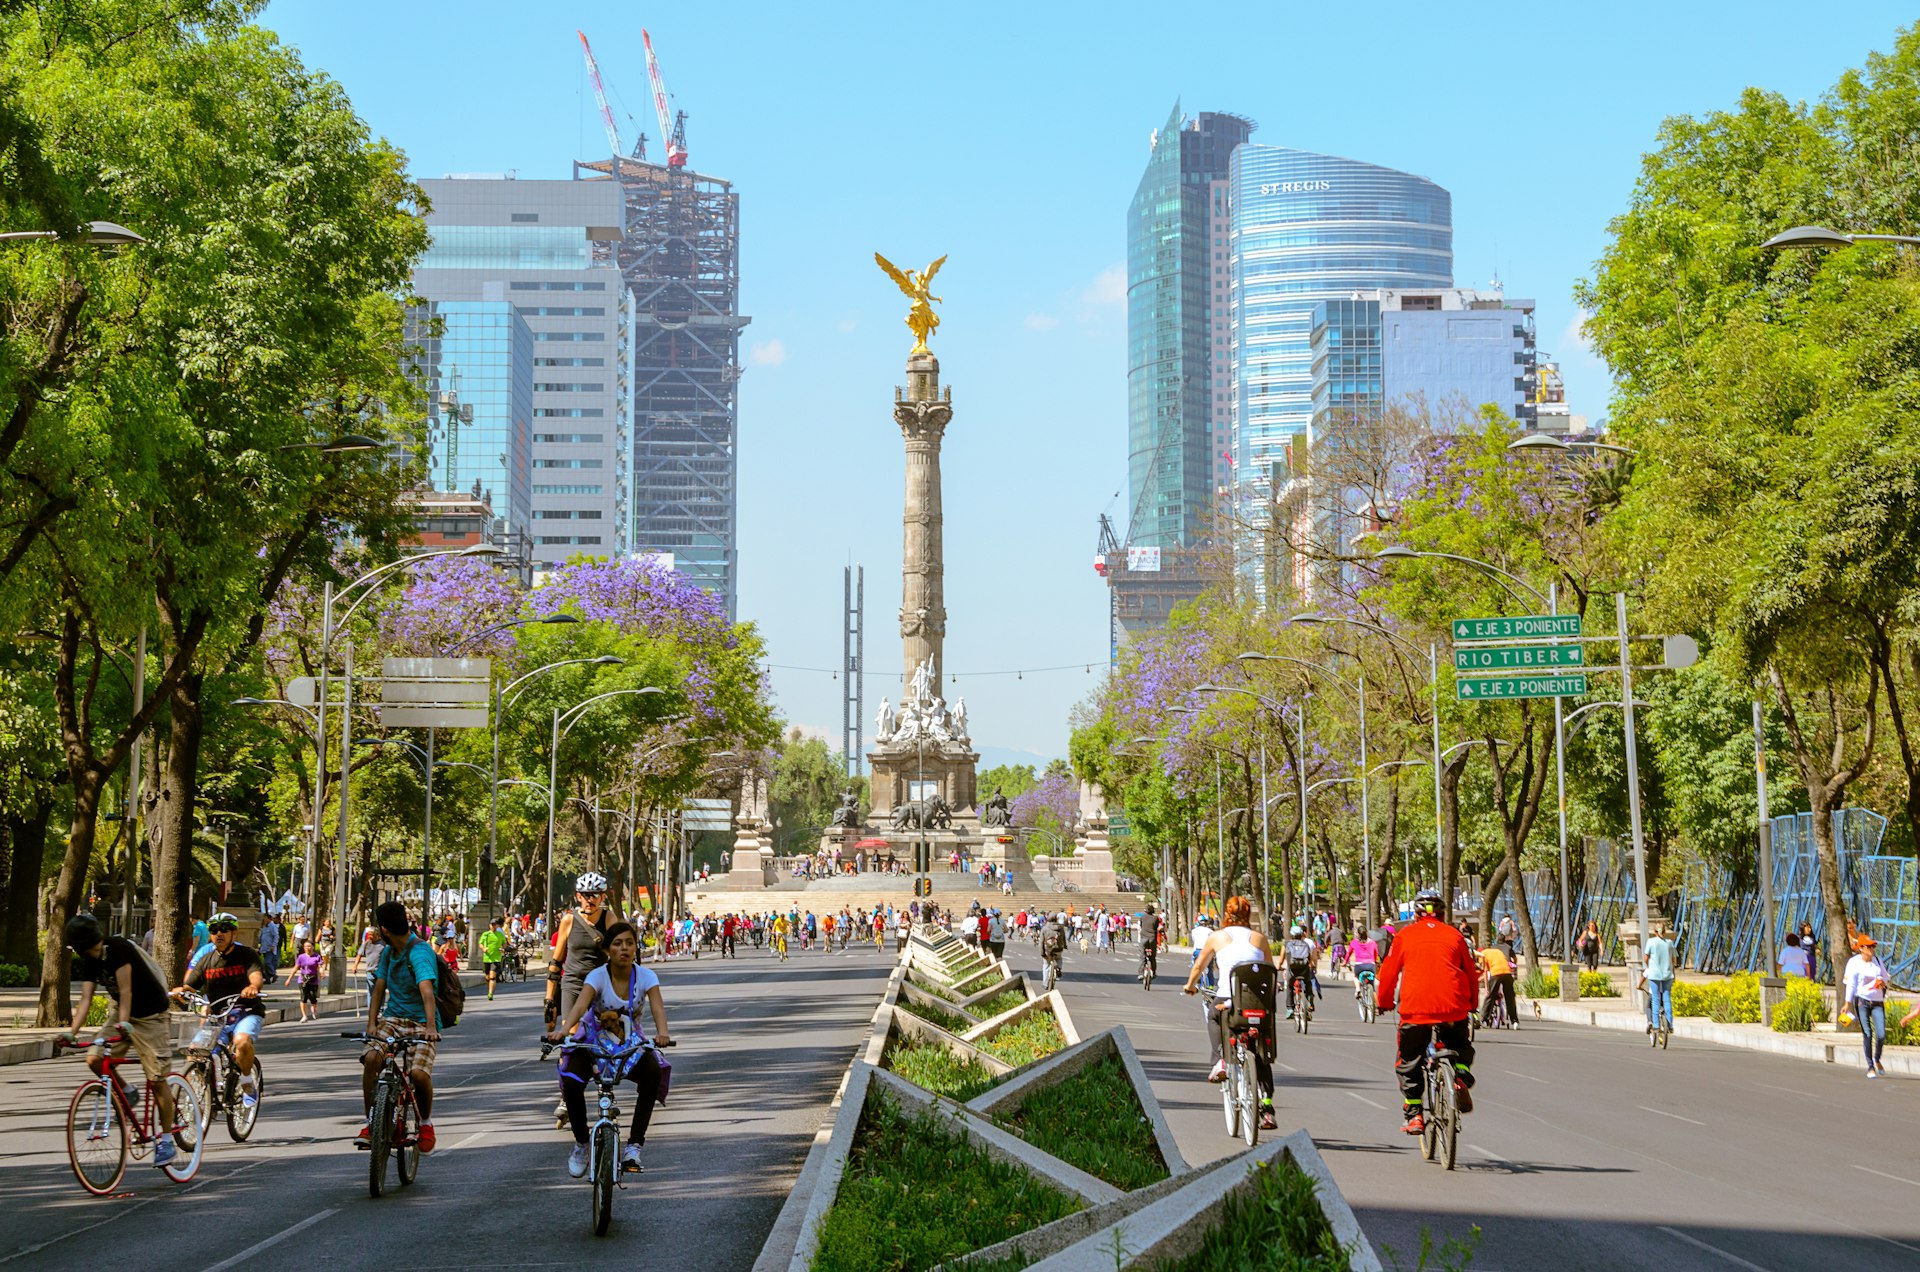 Bicycle riders take to car-free streets on Sundays in Mexico City